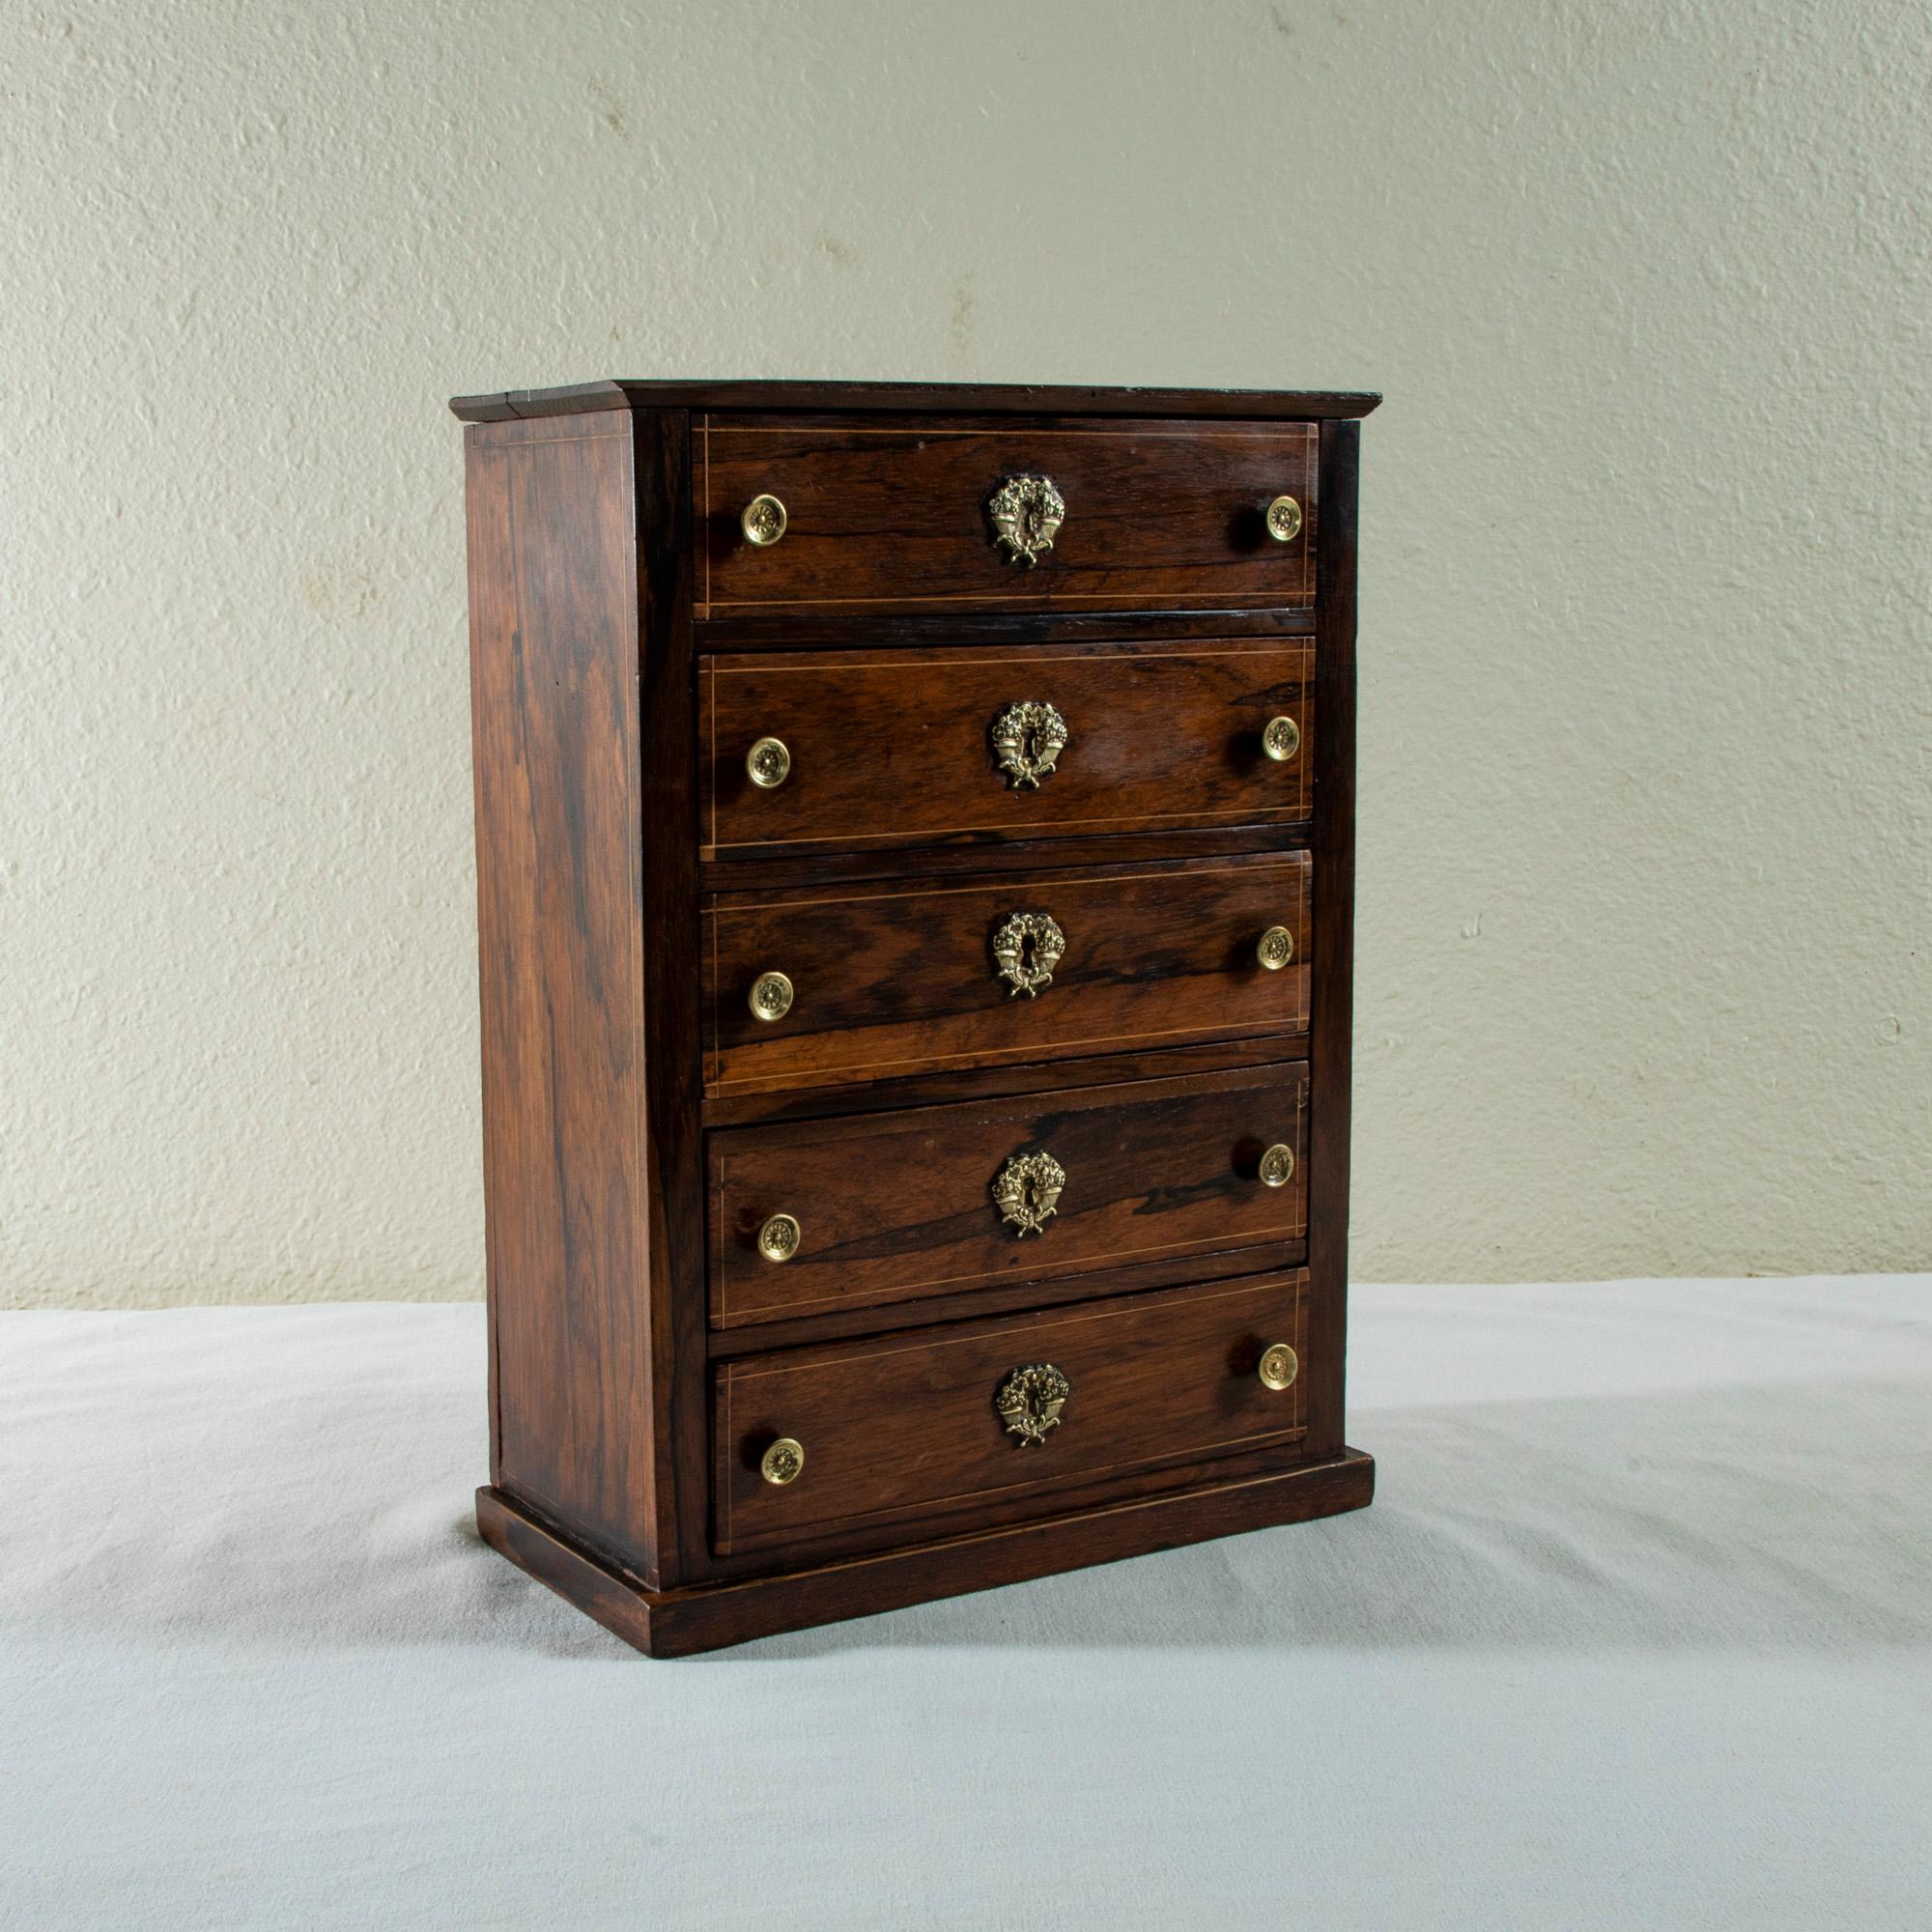 This miniature chest from the late nineteenth century is a 